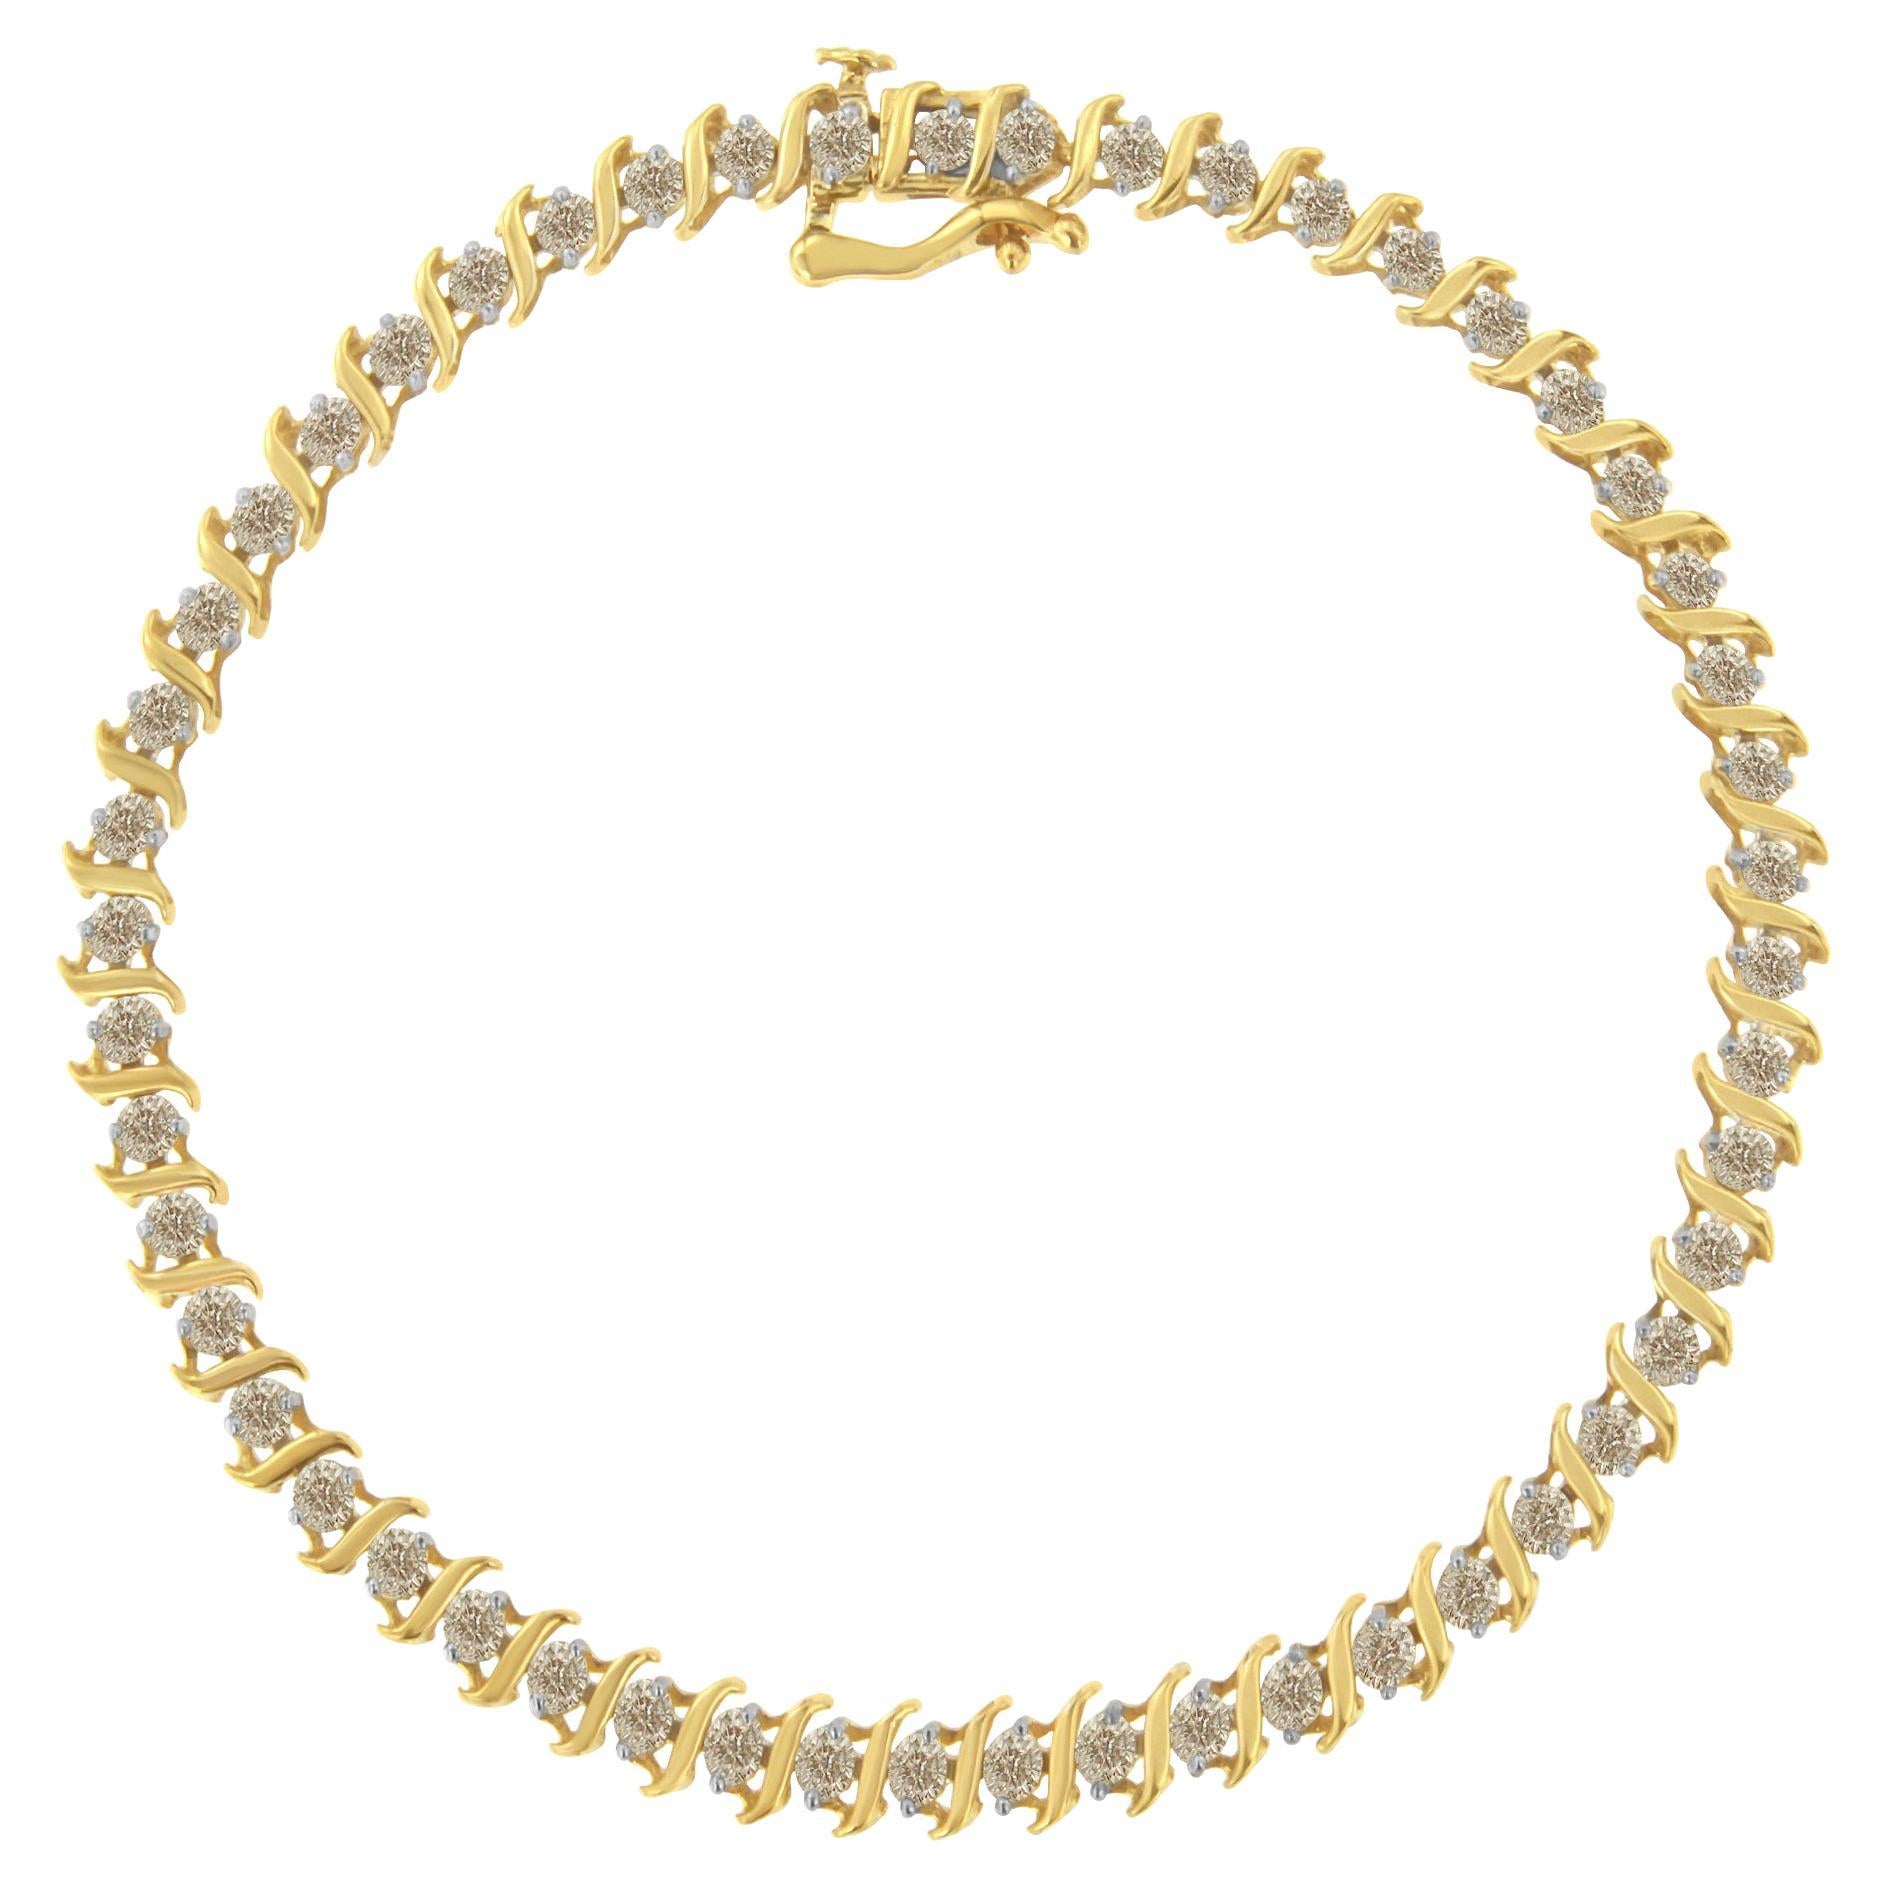 Yellow Gold Plated Sterling Silver 2.0 Carat Diamond Link Tennis Bracelet For Sale